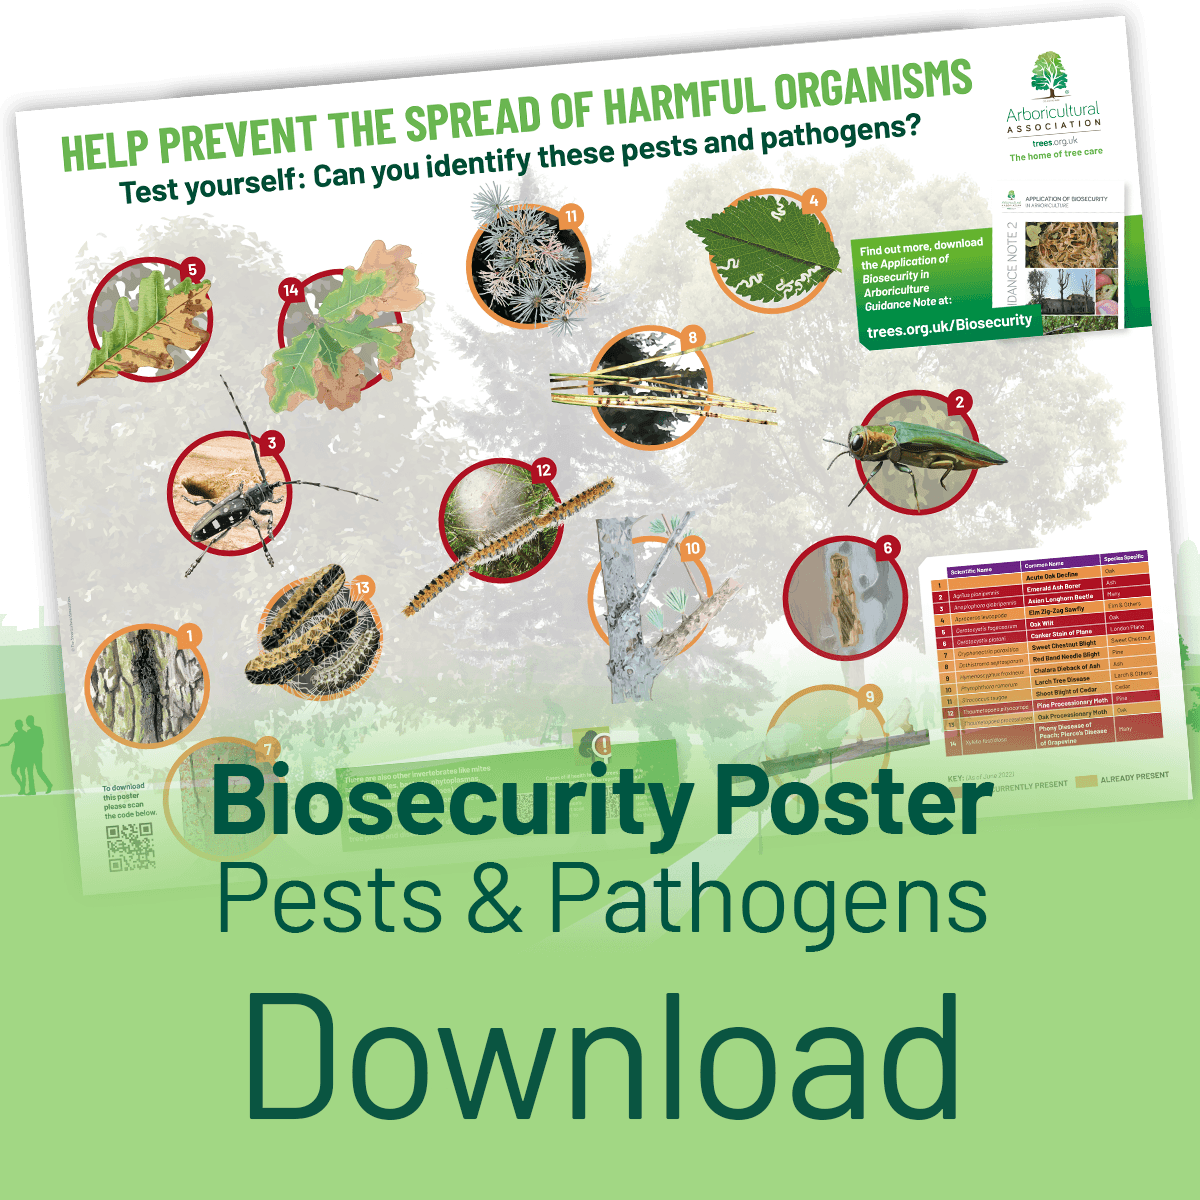 Download the Pests and Pathogens Poster